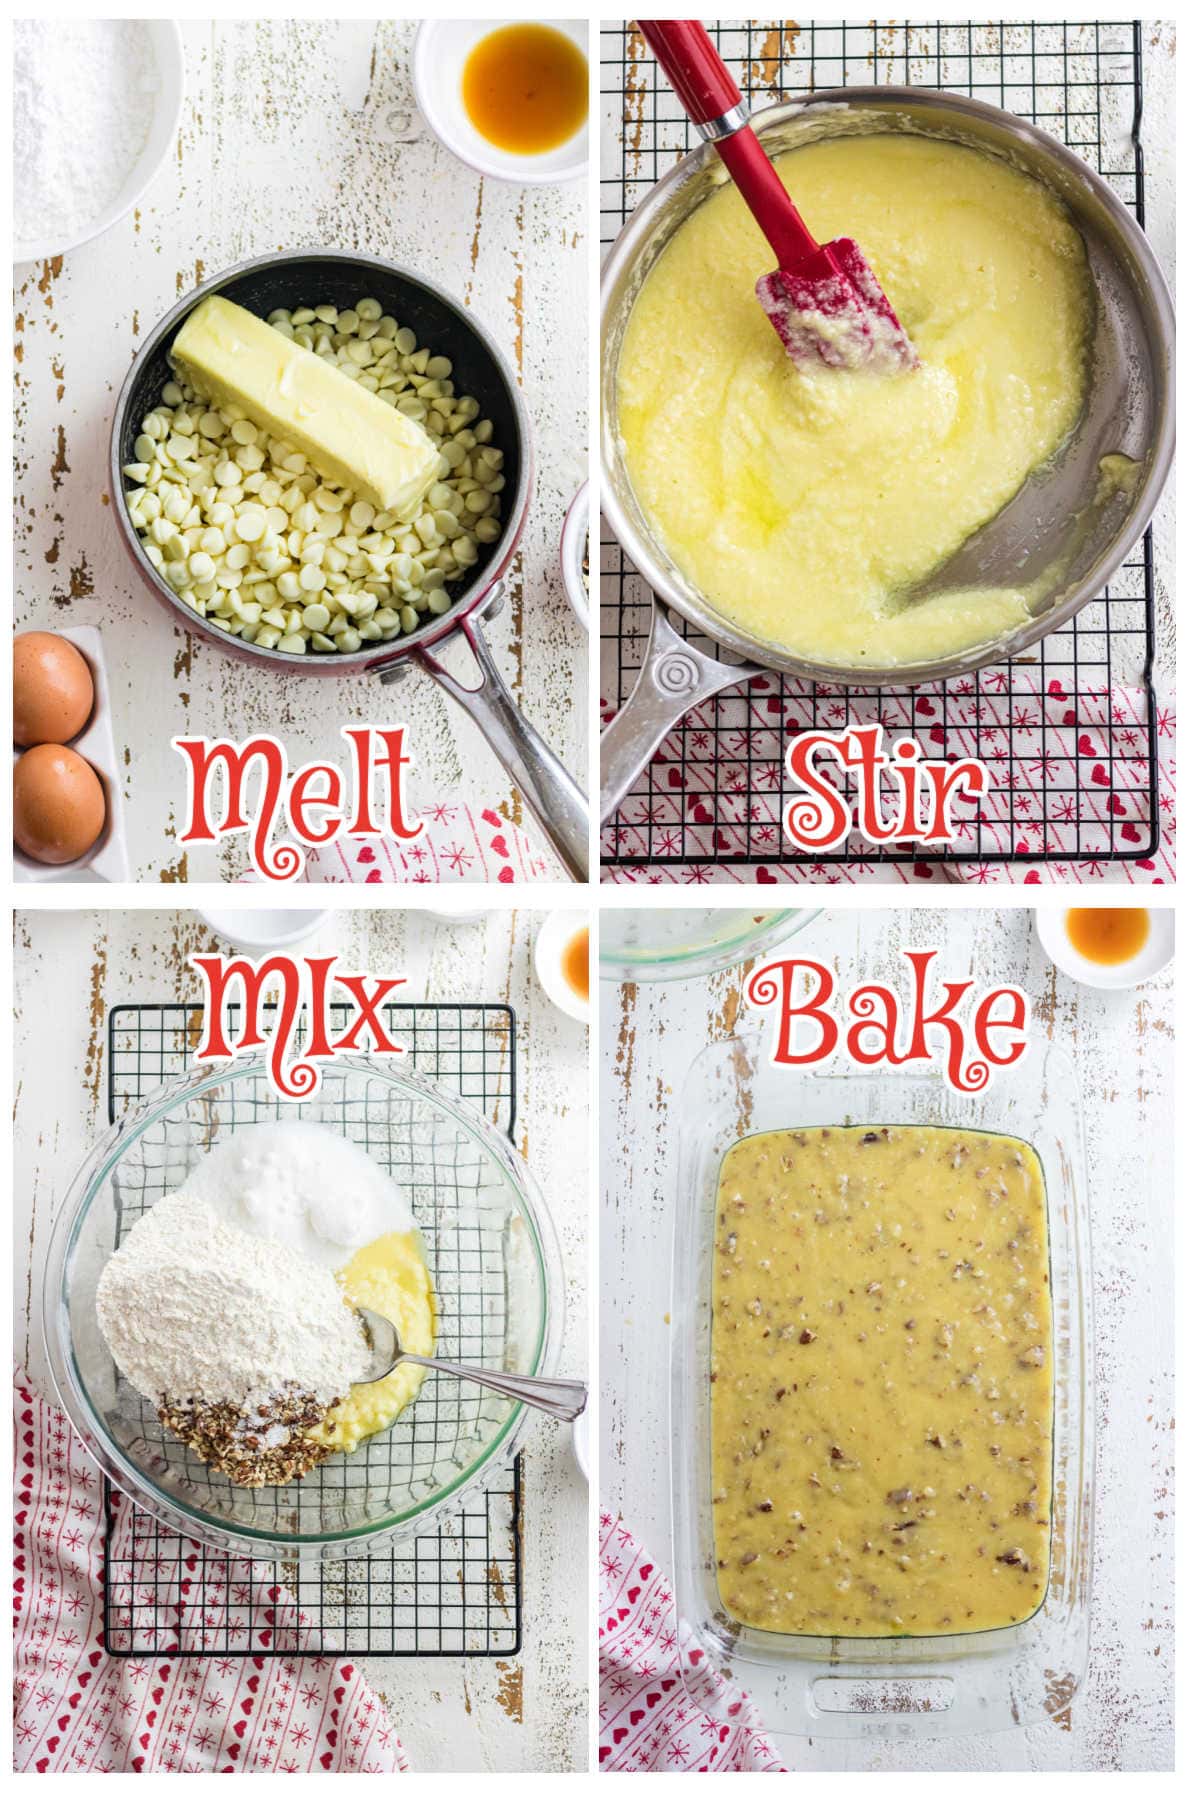 Step by step images for mixing the brownie batter.